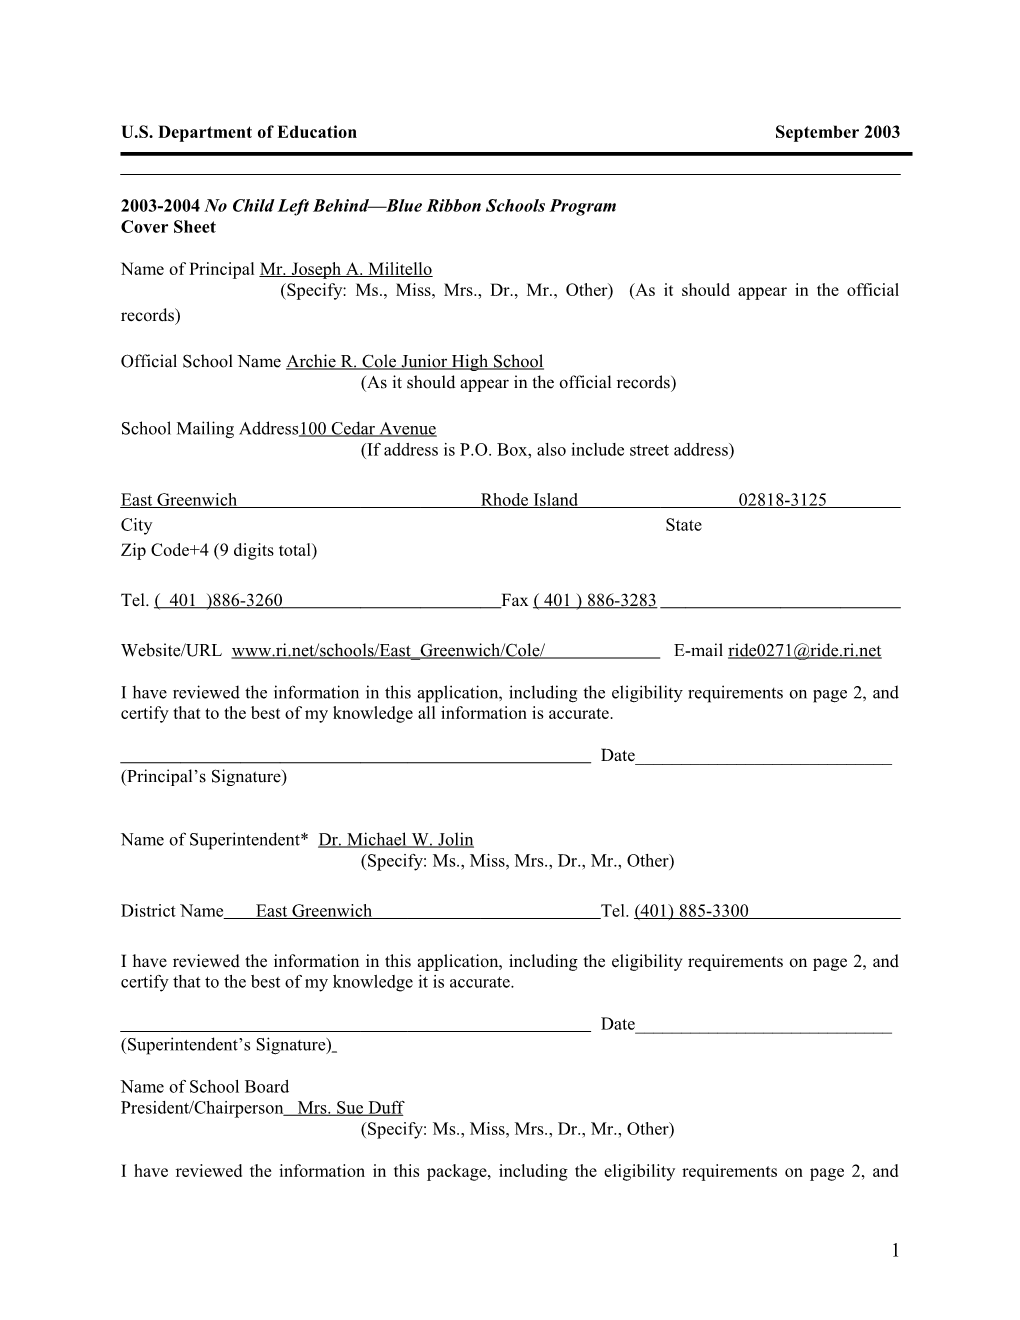 Archie R. Cole Middle School 2004 No Child Left Behind-Blue Ribbon School Application (Msword)